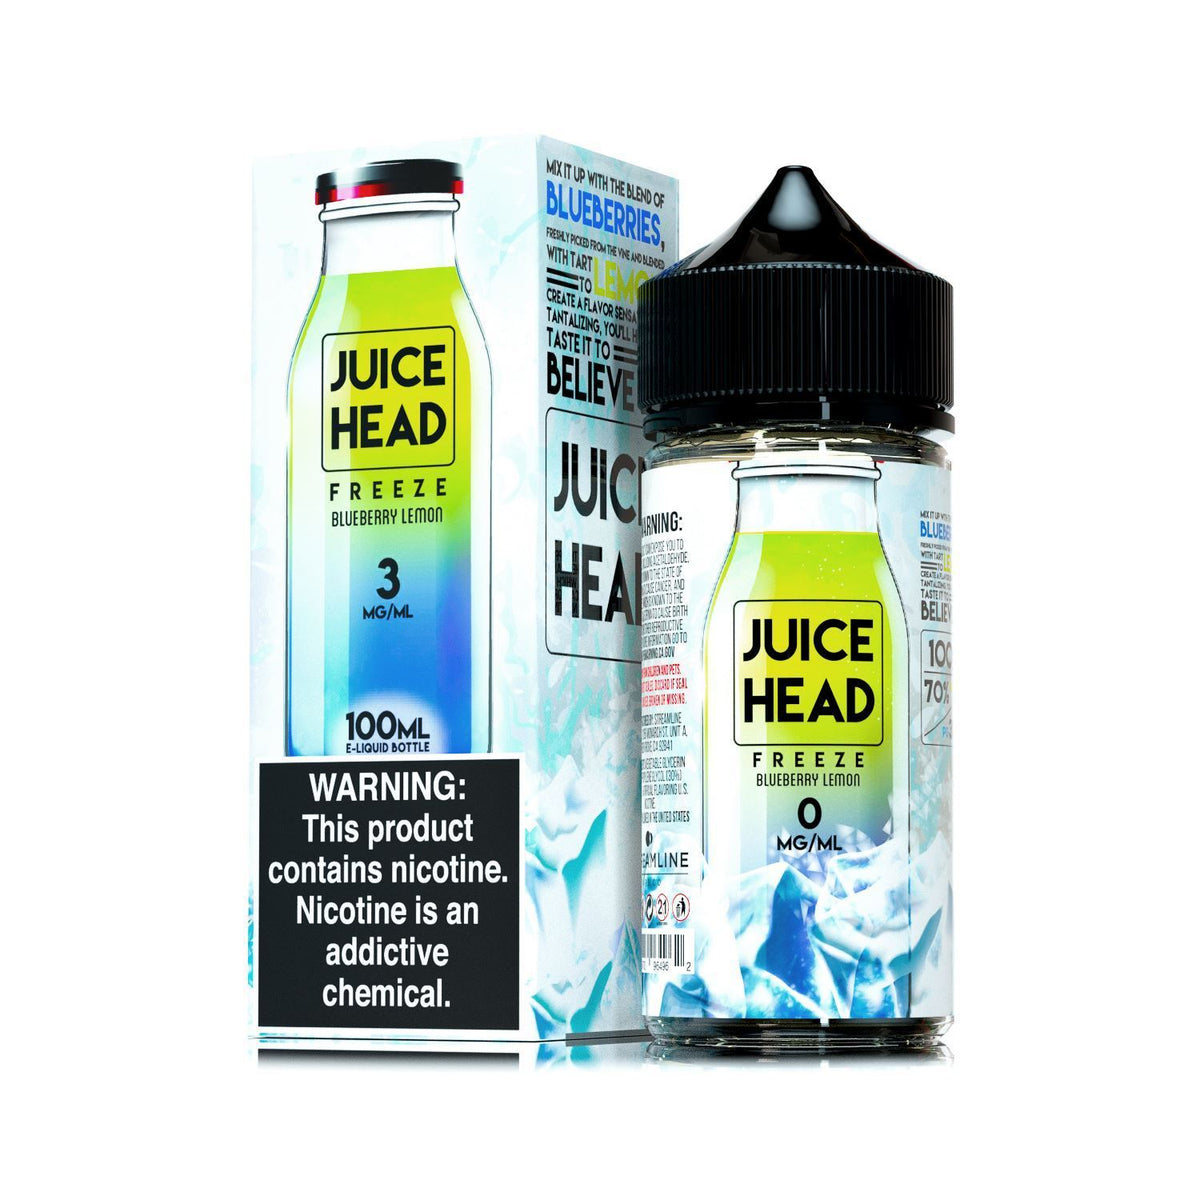 Blueberry Lemon Freeze by Juice Head Series 100ml with Packaging